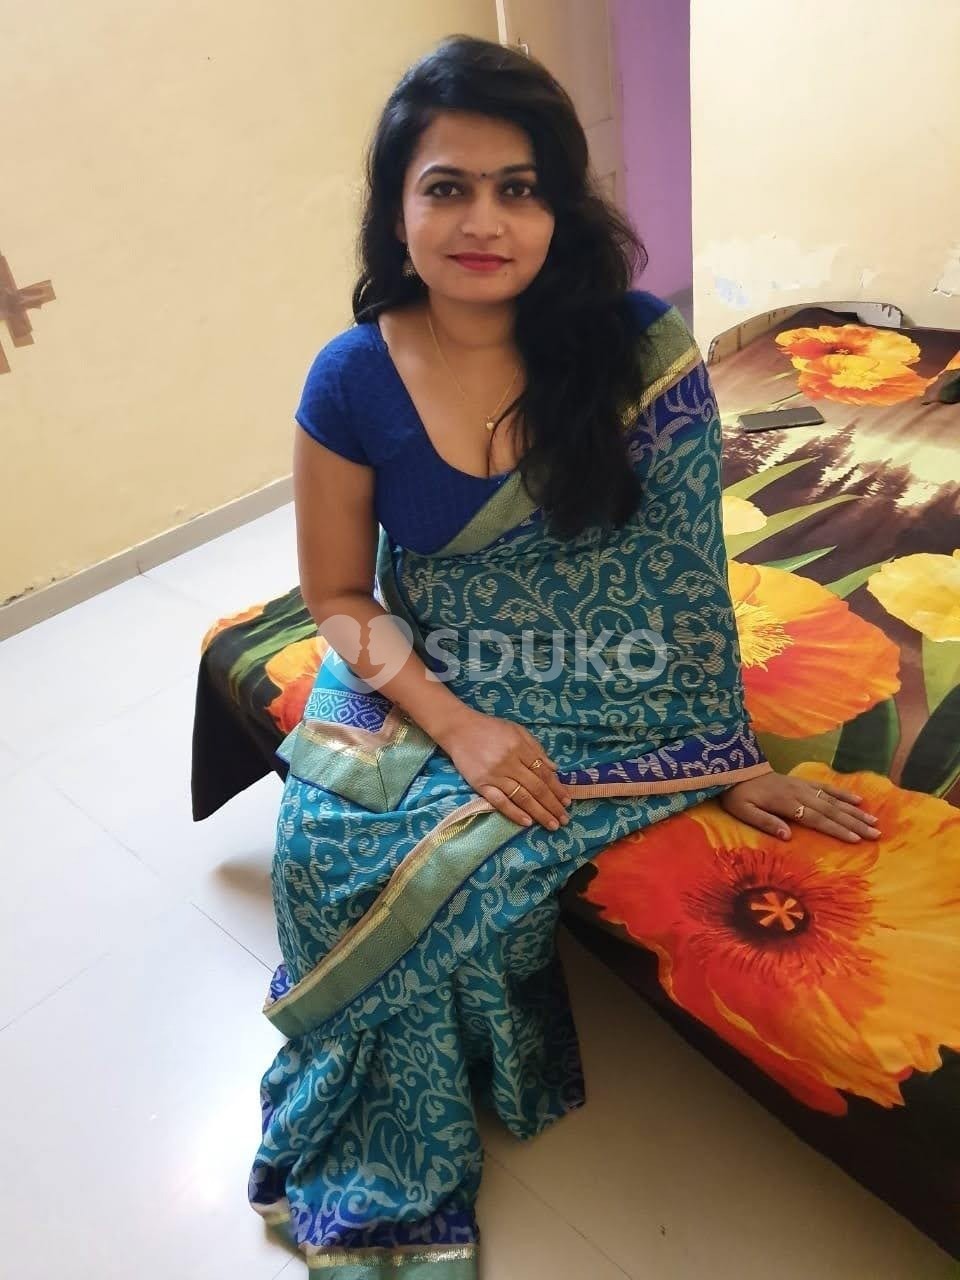 Mysore...low price 🥰 myself kavya 100% SAFE AND SECURE TODAY LOW PRICE UNLIMITED ENJOY HOT COLLEGE GIRL HOUSEWIFE AUN